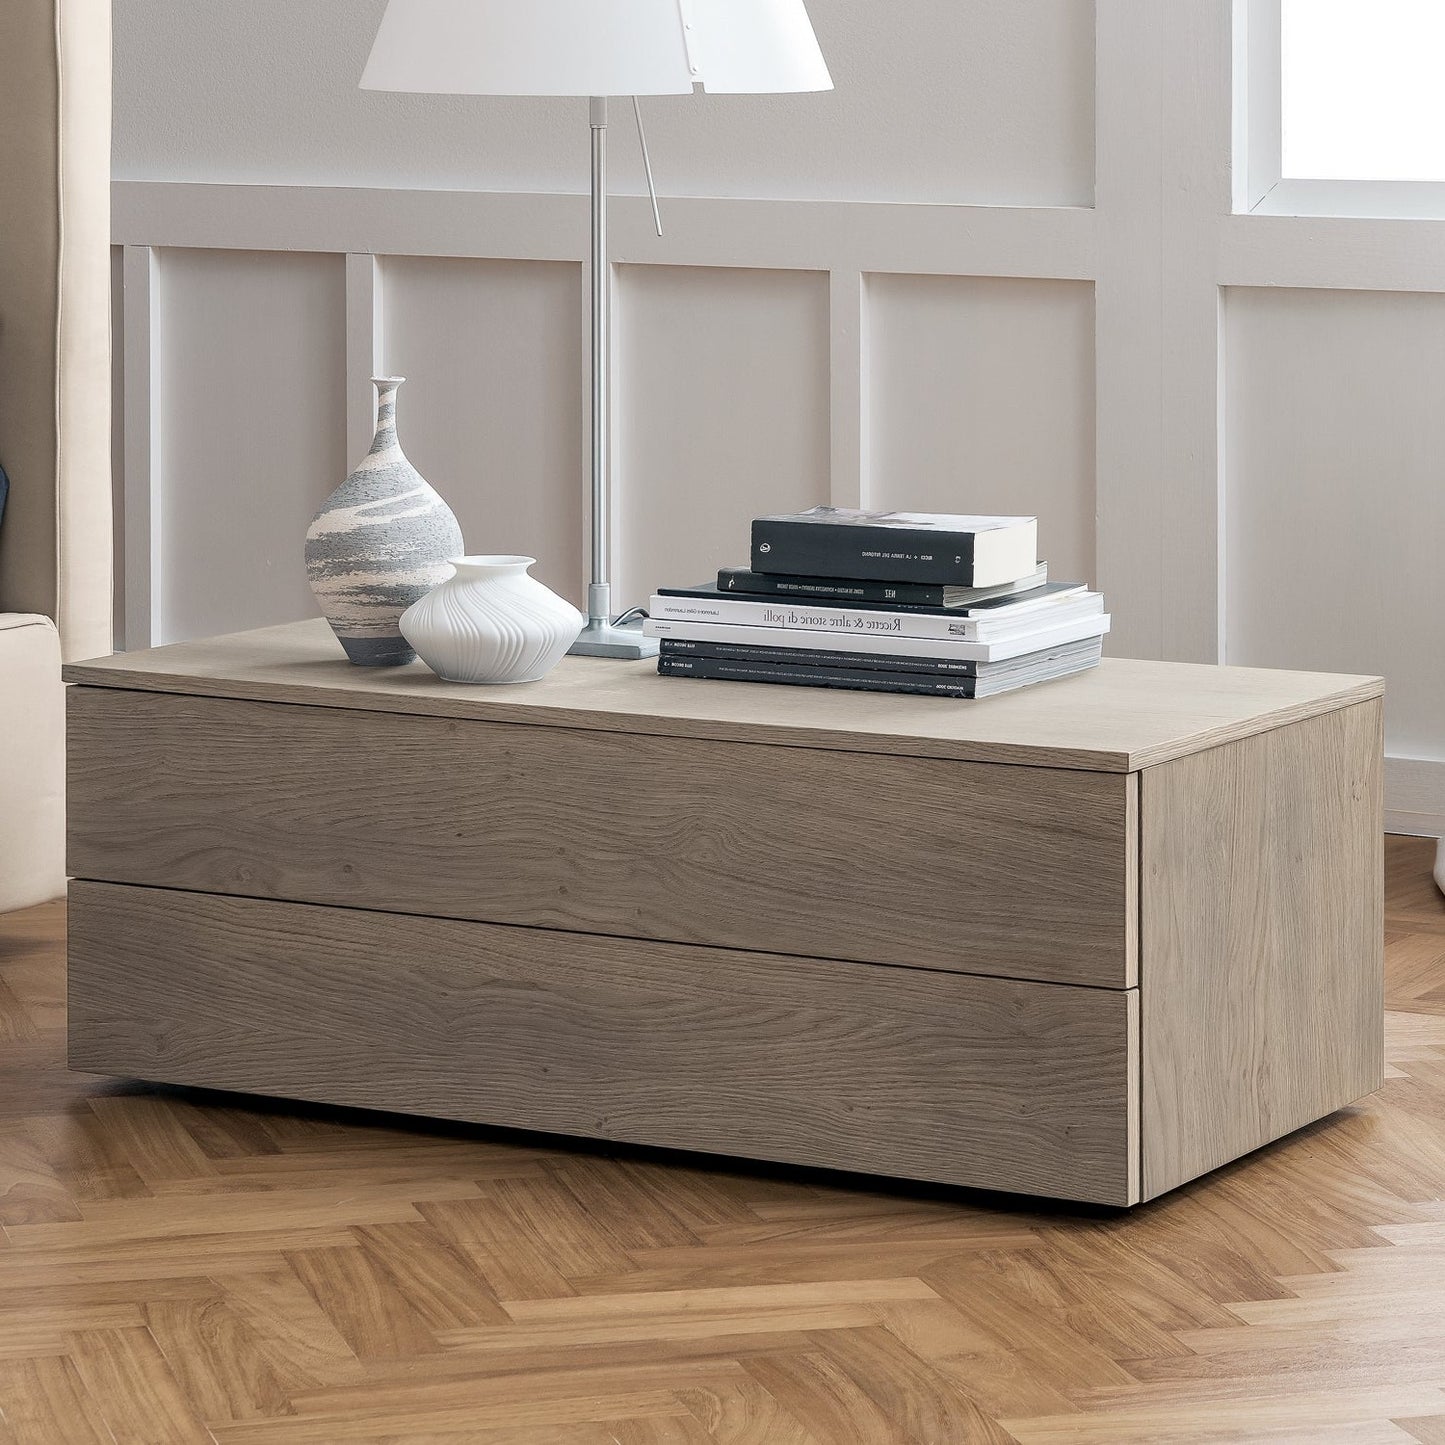 Slim Long Bedside Cabinet By Dall'Agnese